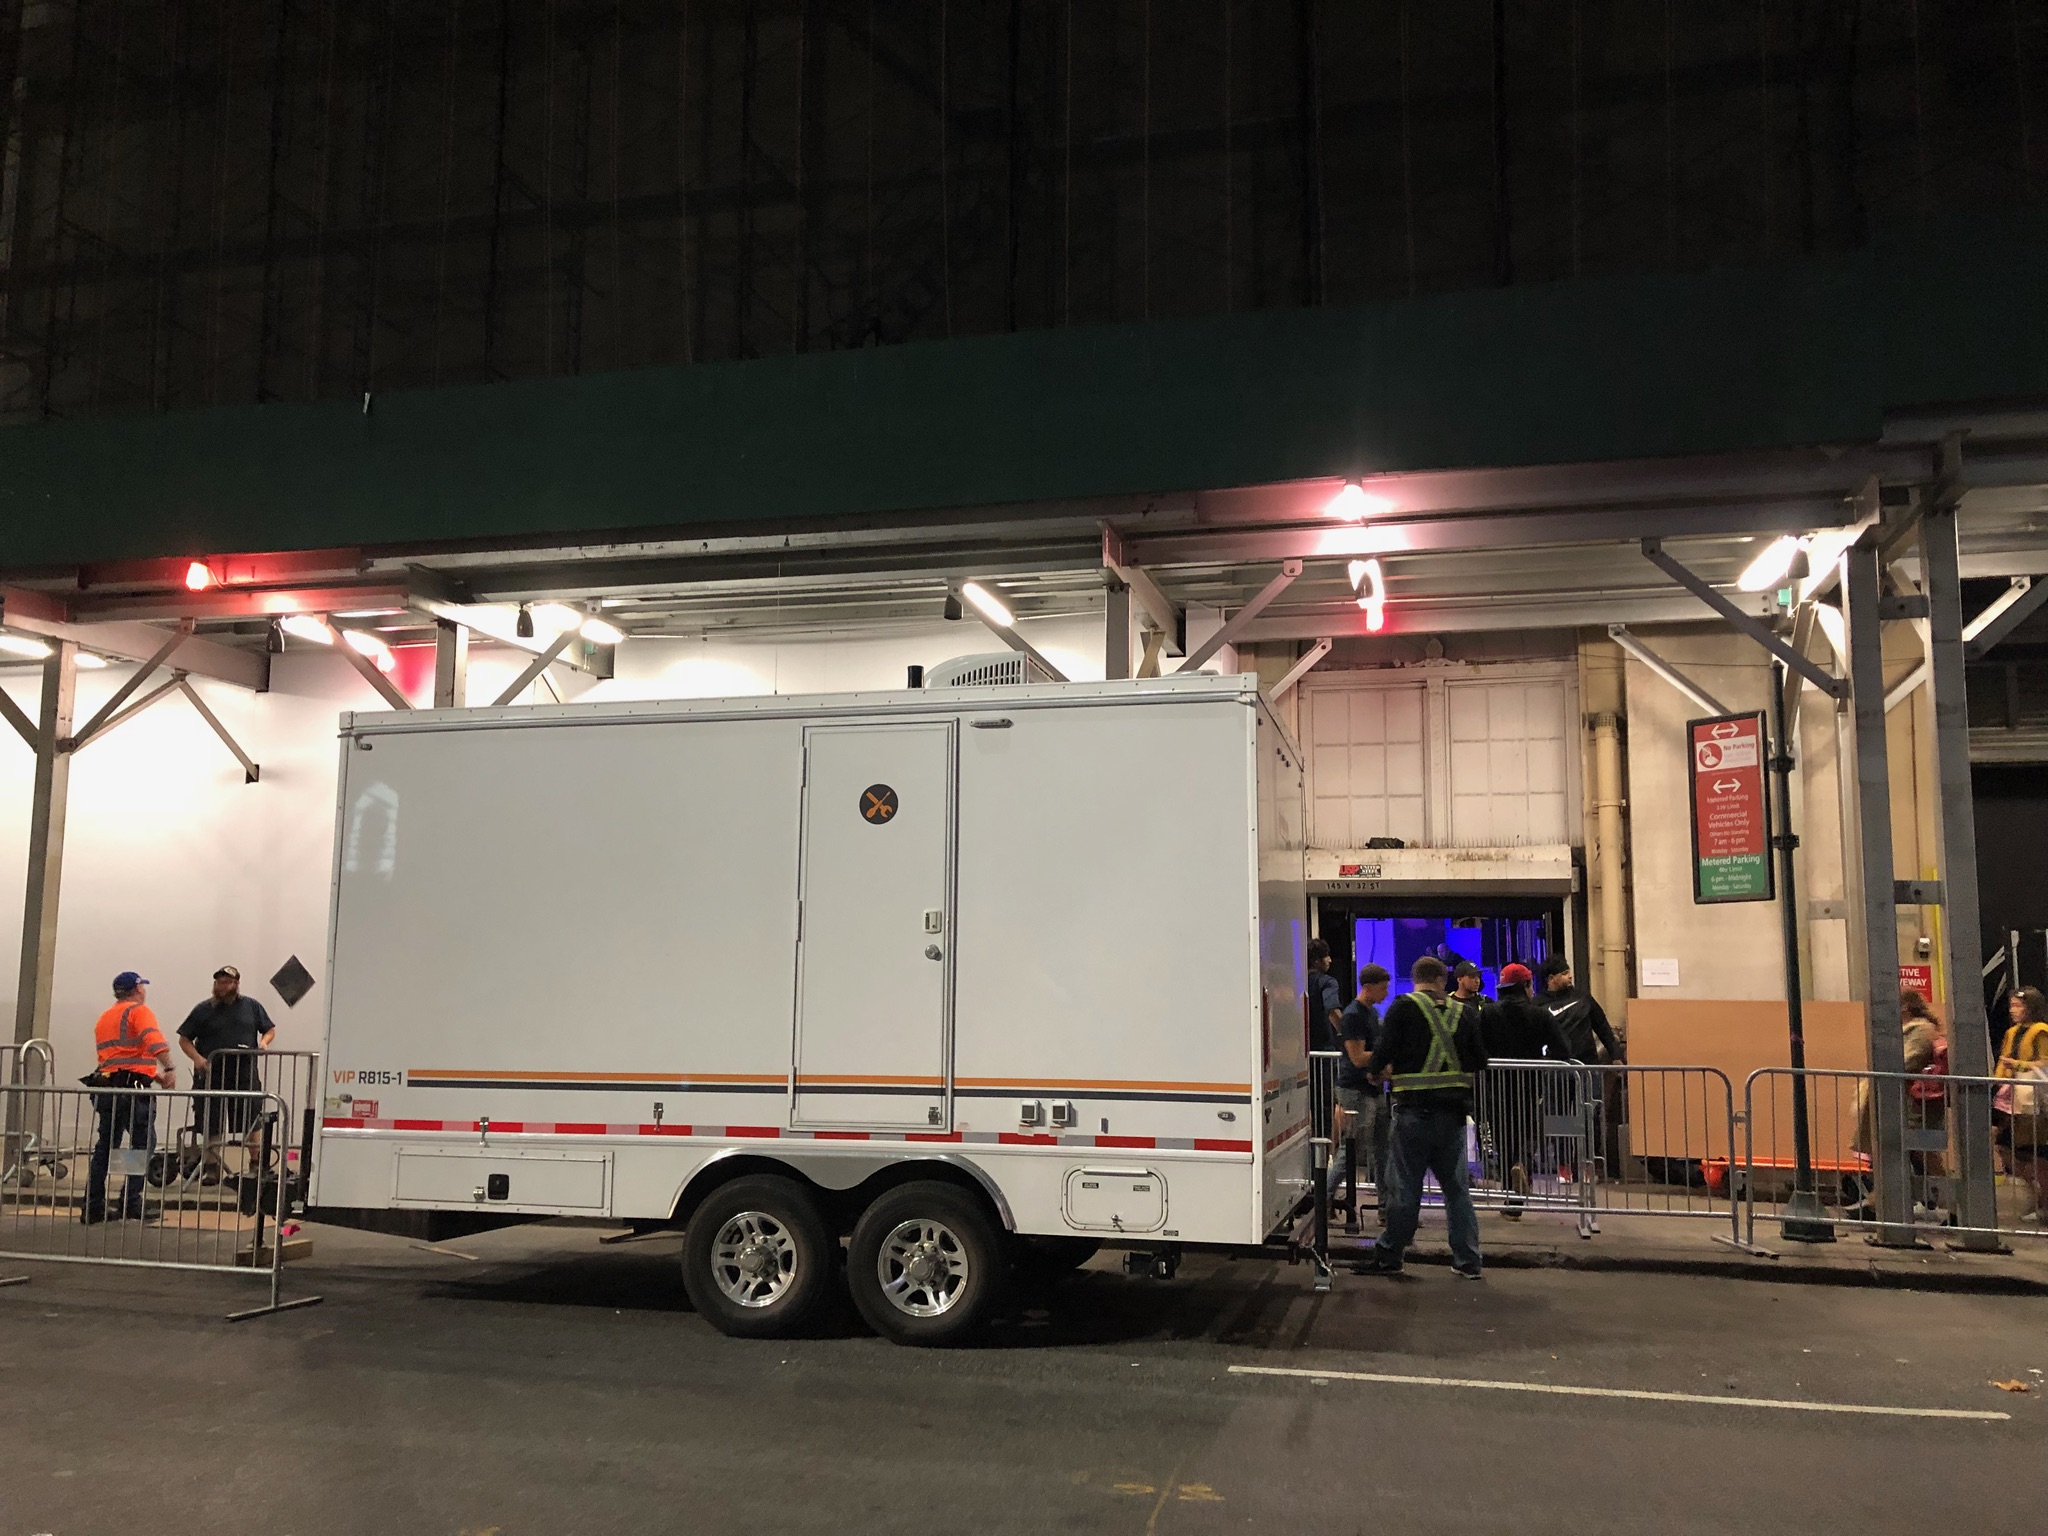 Five Station Rolls Royce Restroom Trailer, at Macy's Day Parade by NBC Studios, in Manhattan NY 